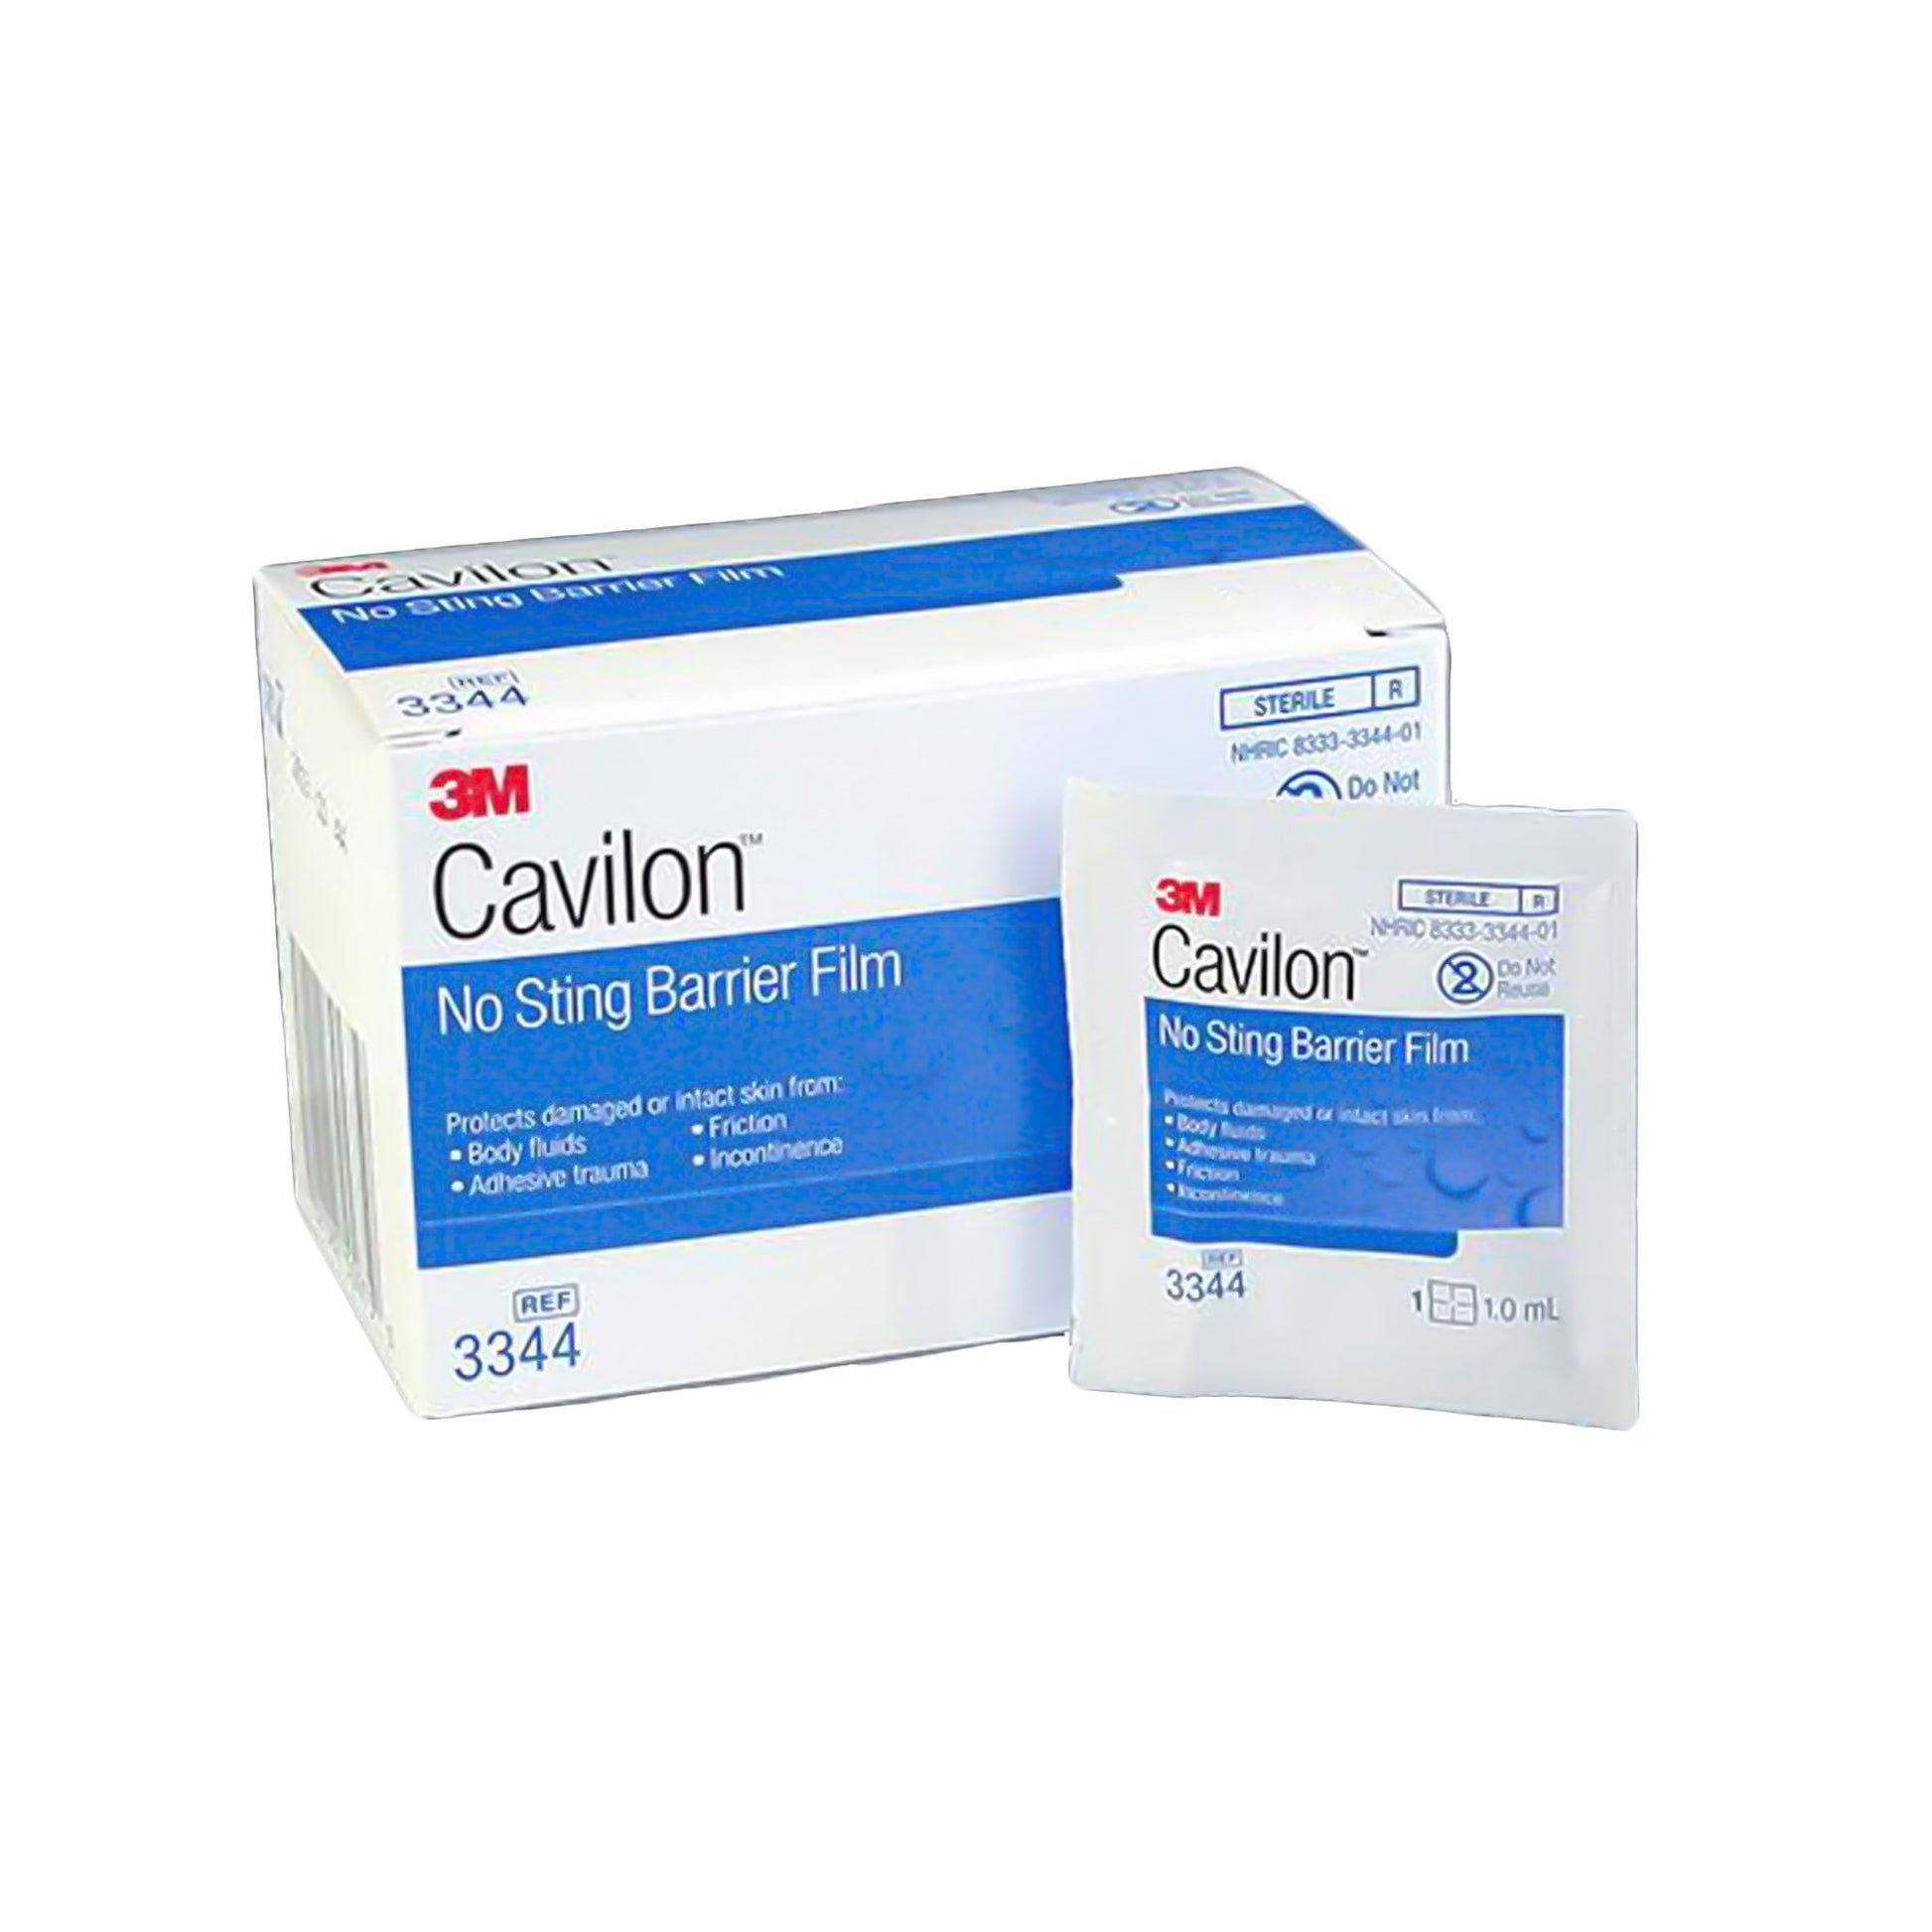 3M Cavilon Barrier Film Wipes, No Sting, Sterile, Sold As 120/Case 3M 3344